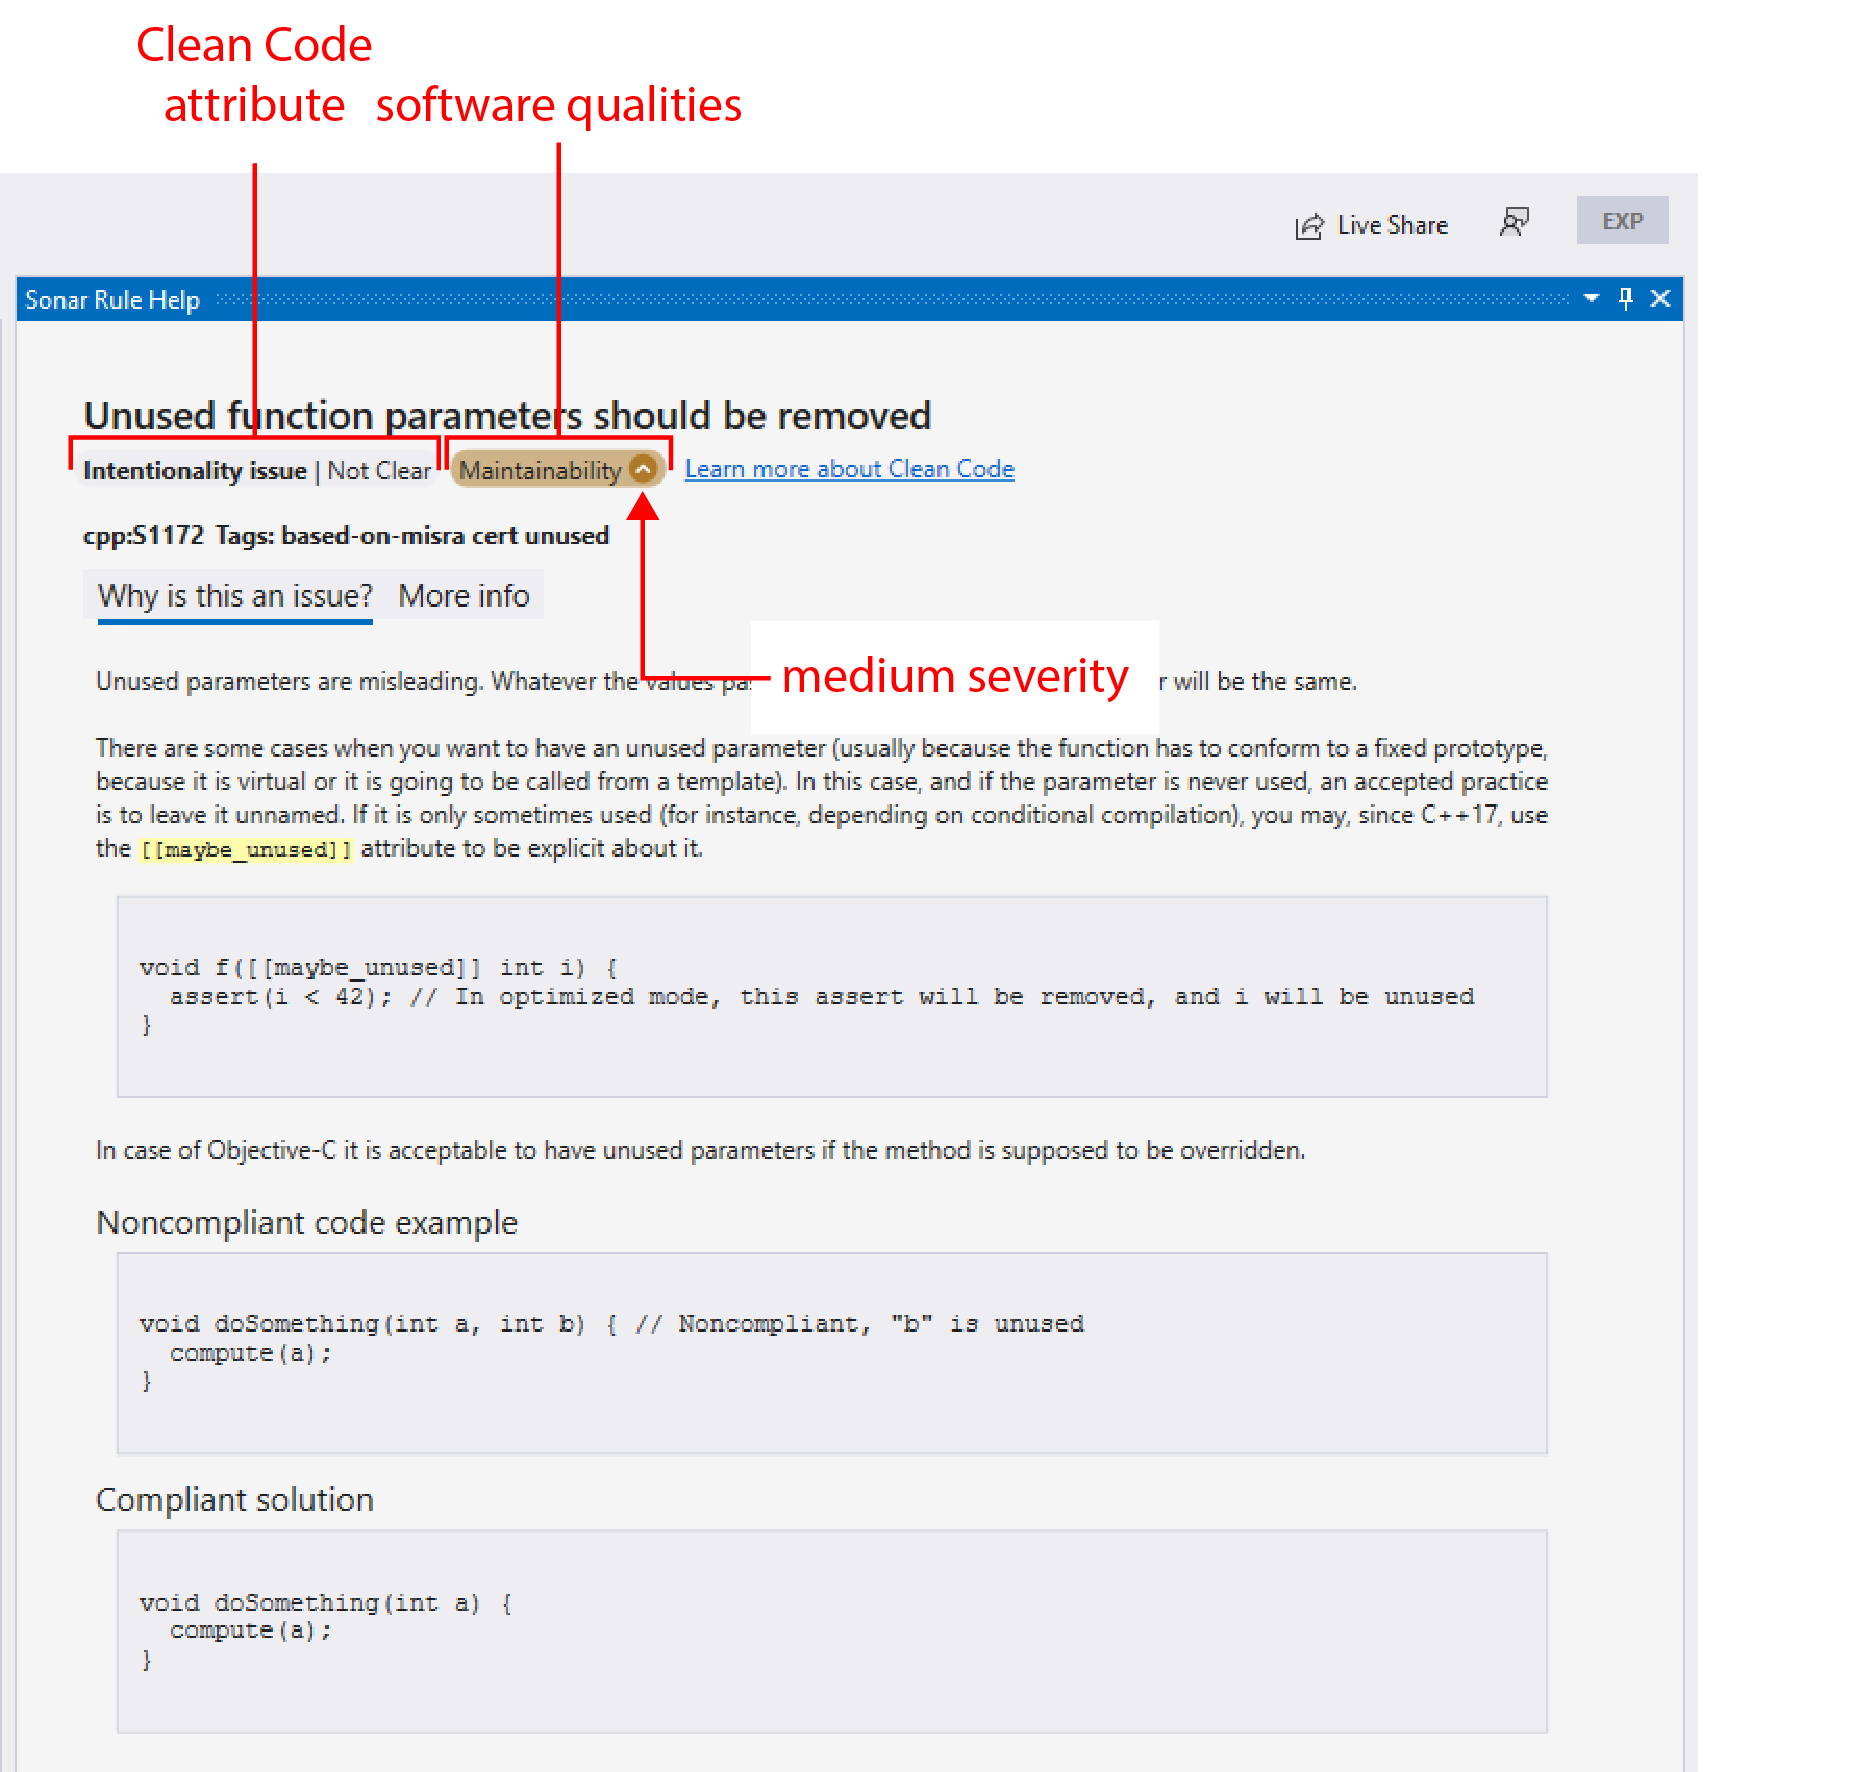 Clean Code attributes and software qualities as they appear in the SonarLint Rule Help view window. 